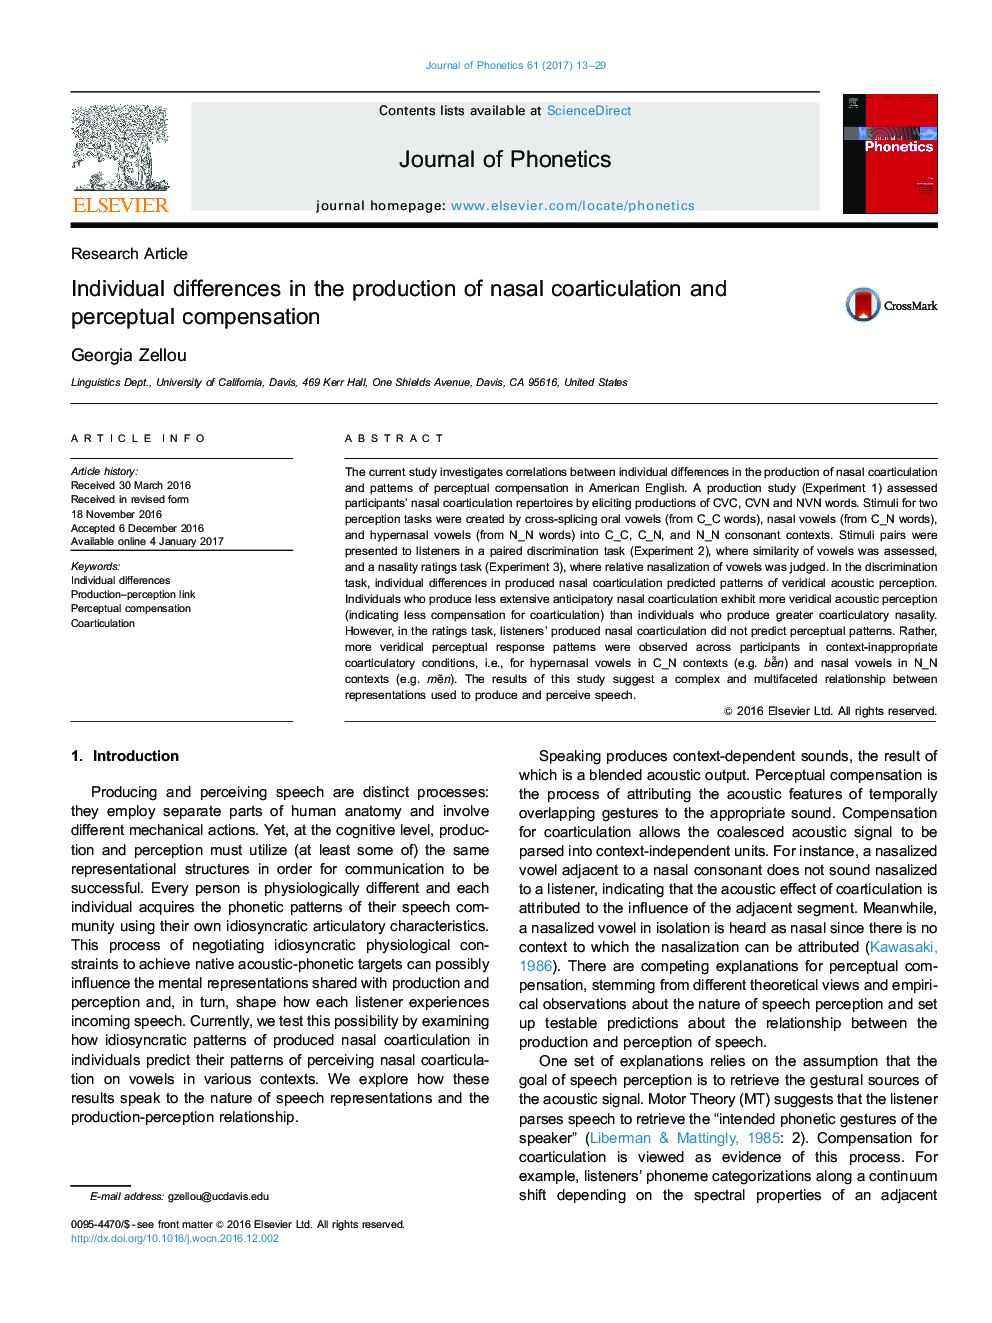 Individual differences in the production of nasal coarticulation and perceptual compensation